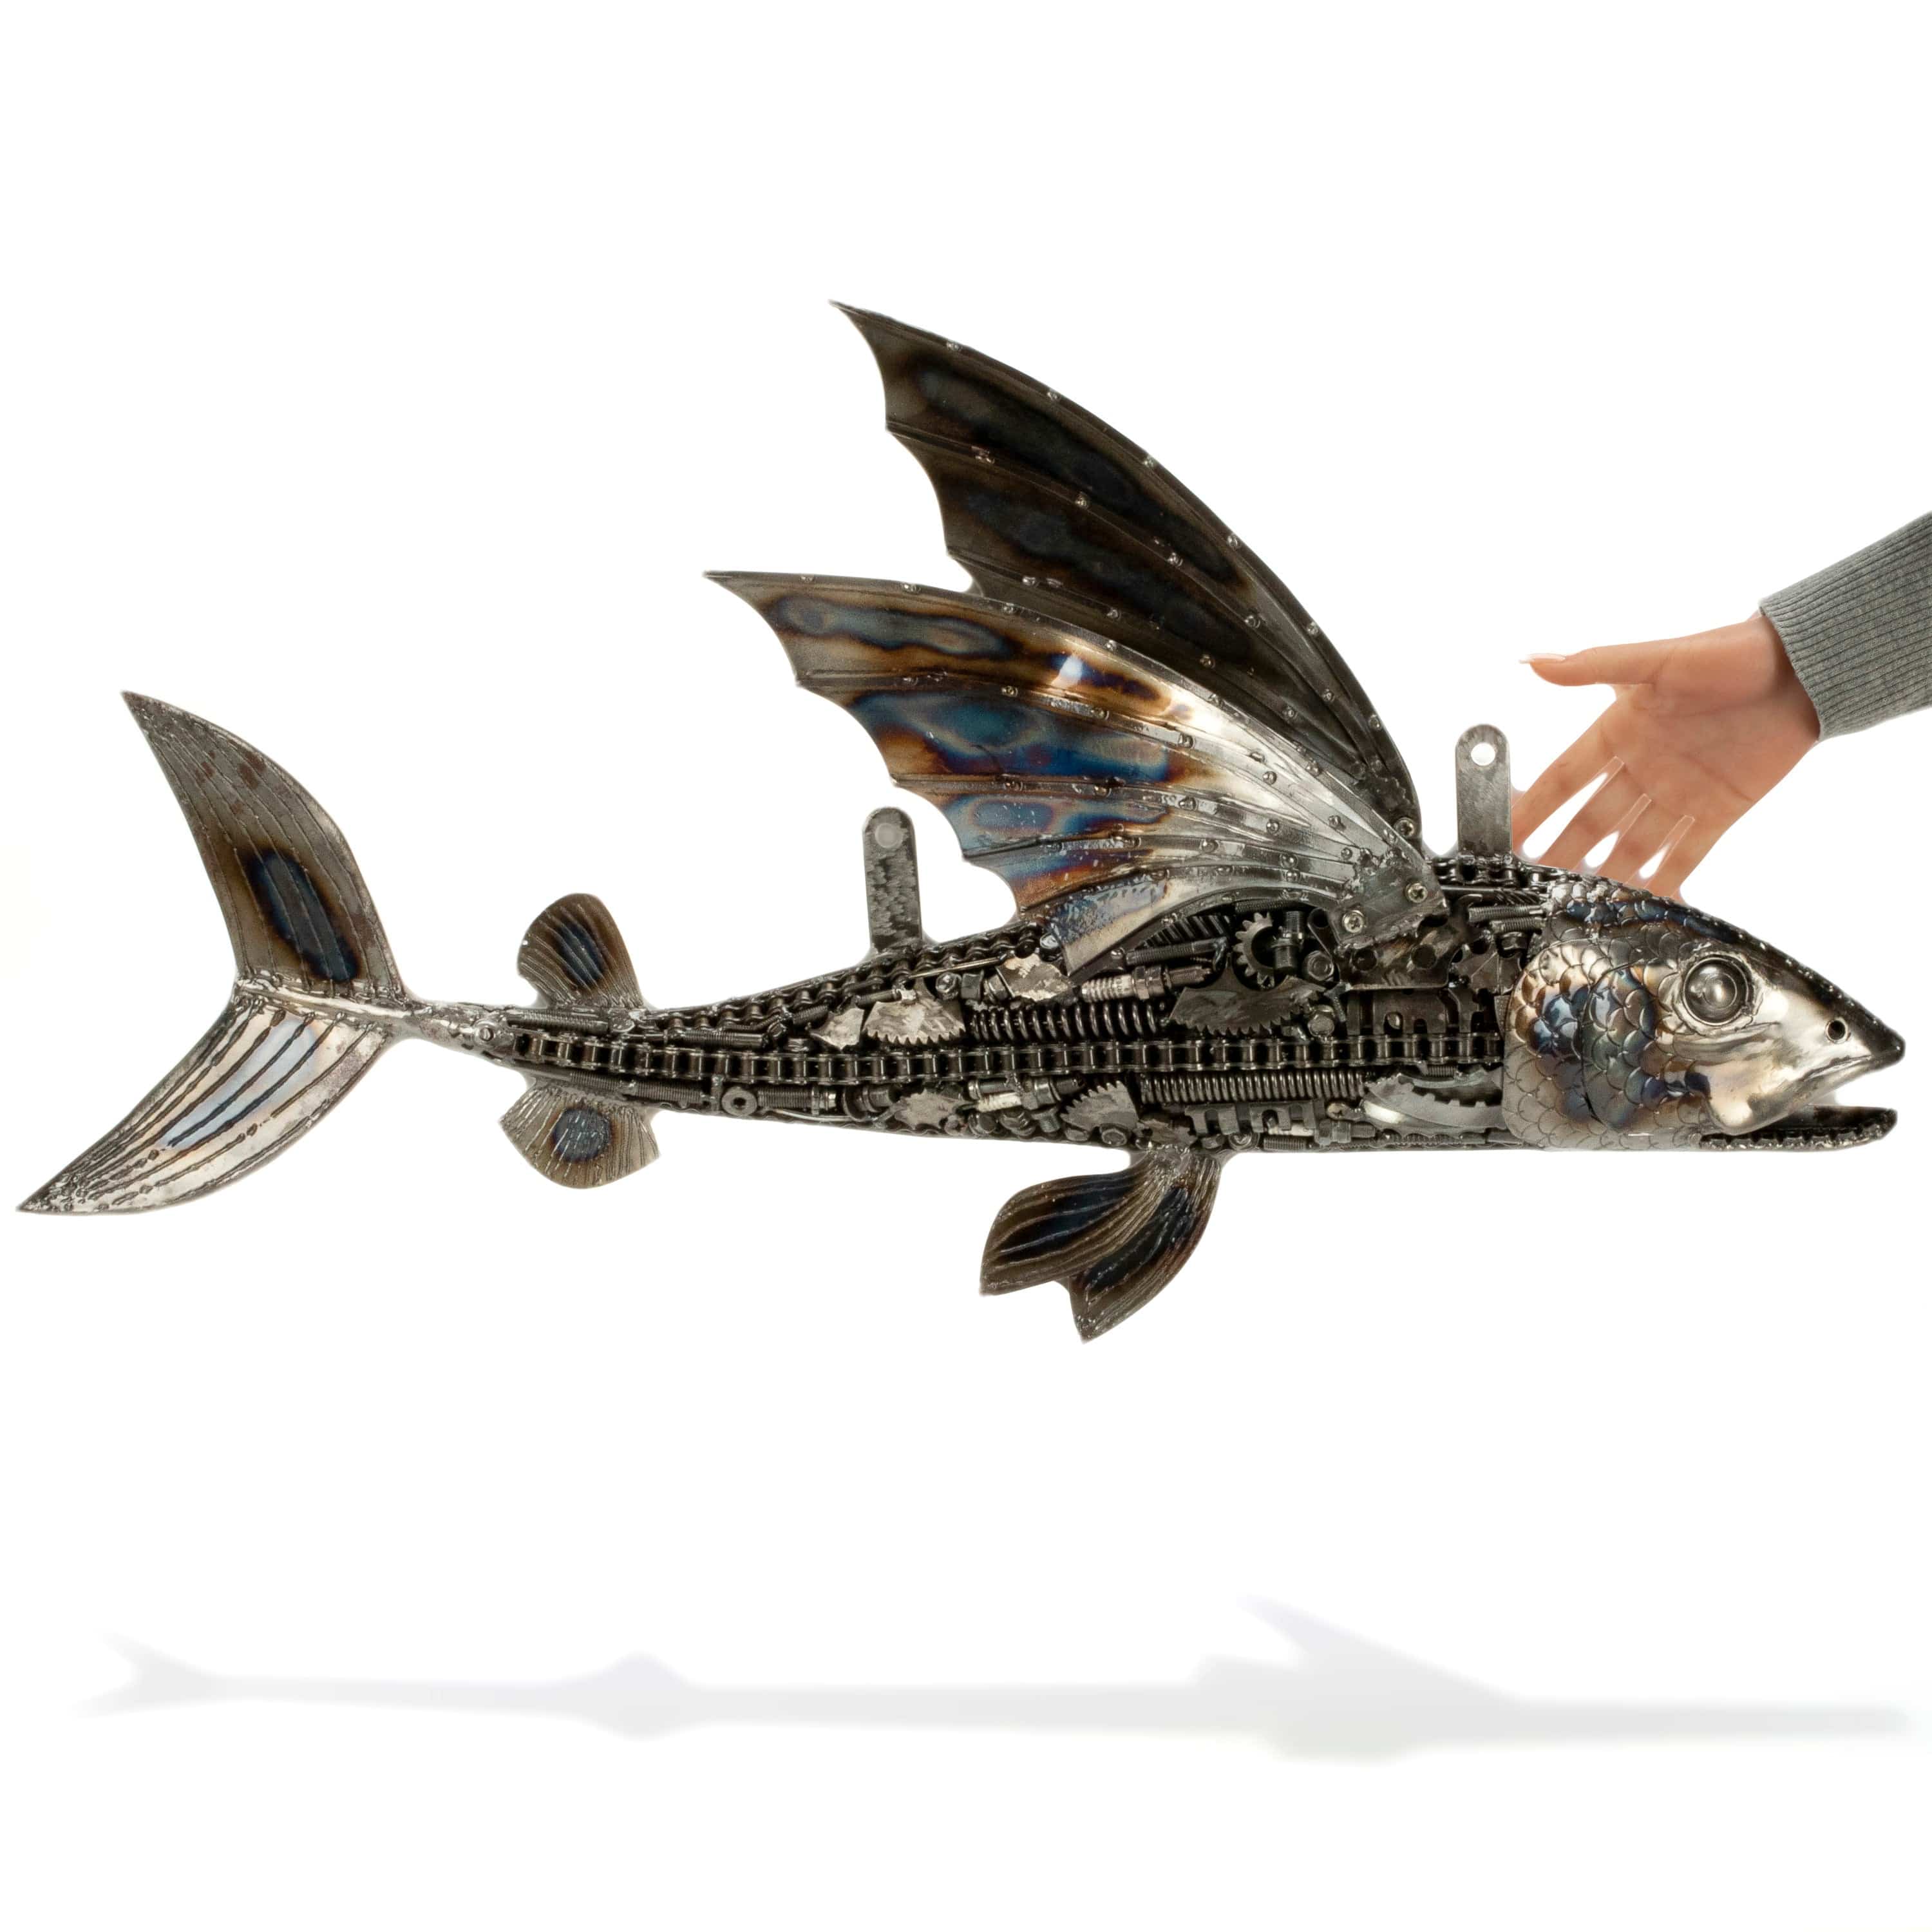 KALIFANO Recycled Metal Art 35" Flying Fish (Left) Inspired Recycled Metal Art Sculpture RMS-FFL88x55-PK